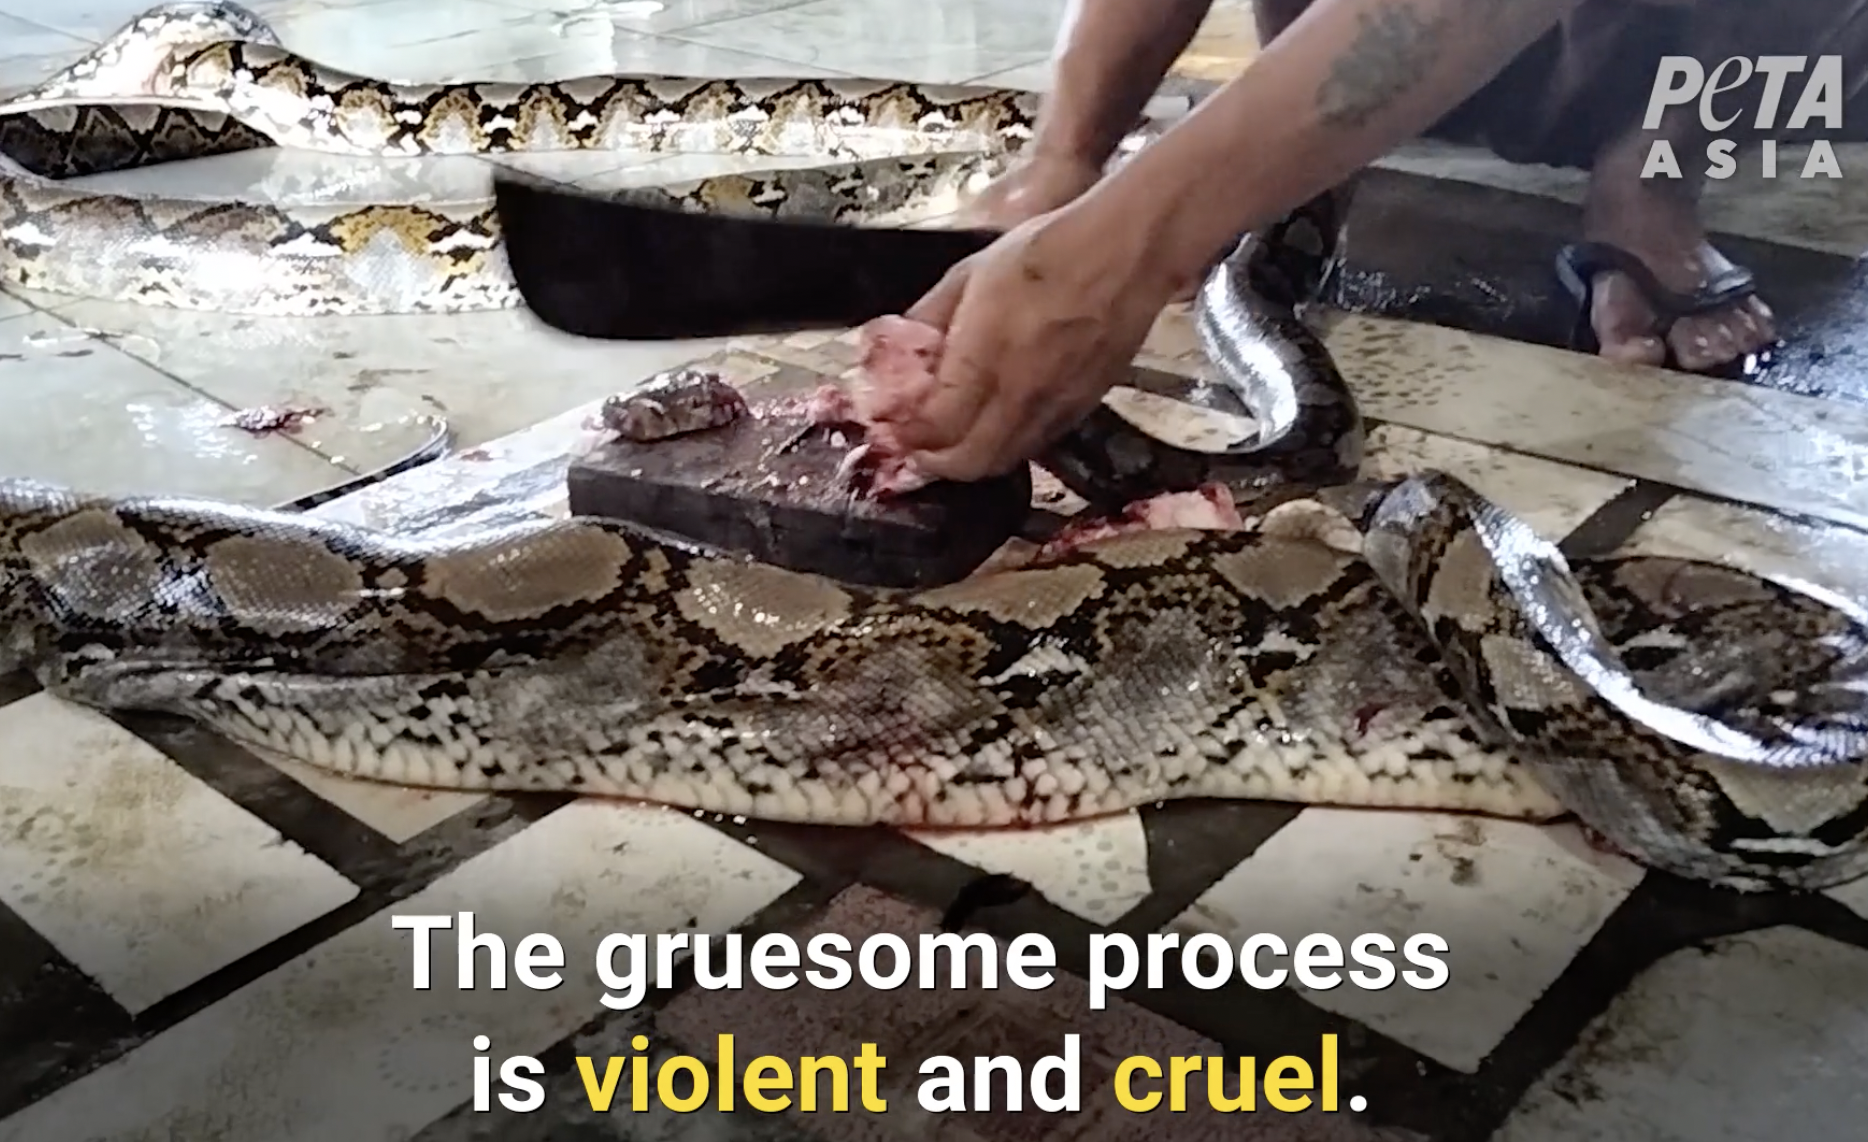 Vuitton & Gucci sell products made from cruelly killed snakes & lizards: animal rights group PETA - Mothership.SG - News from Singapore, Asia and around the